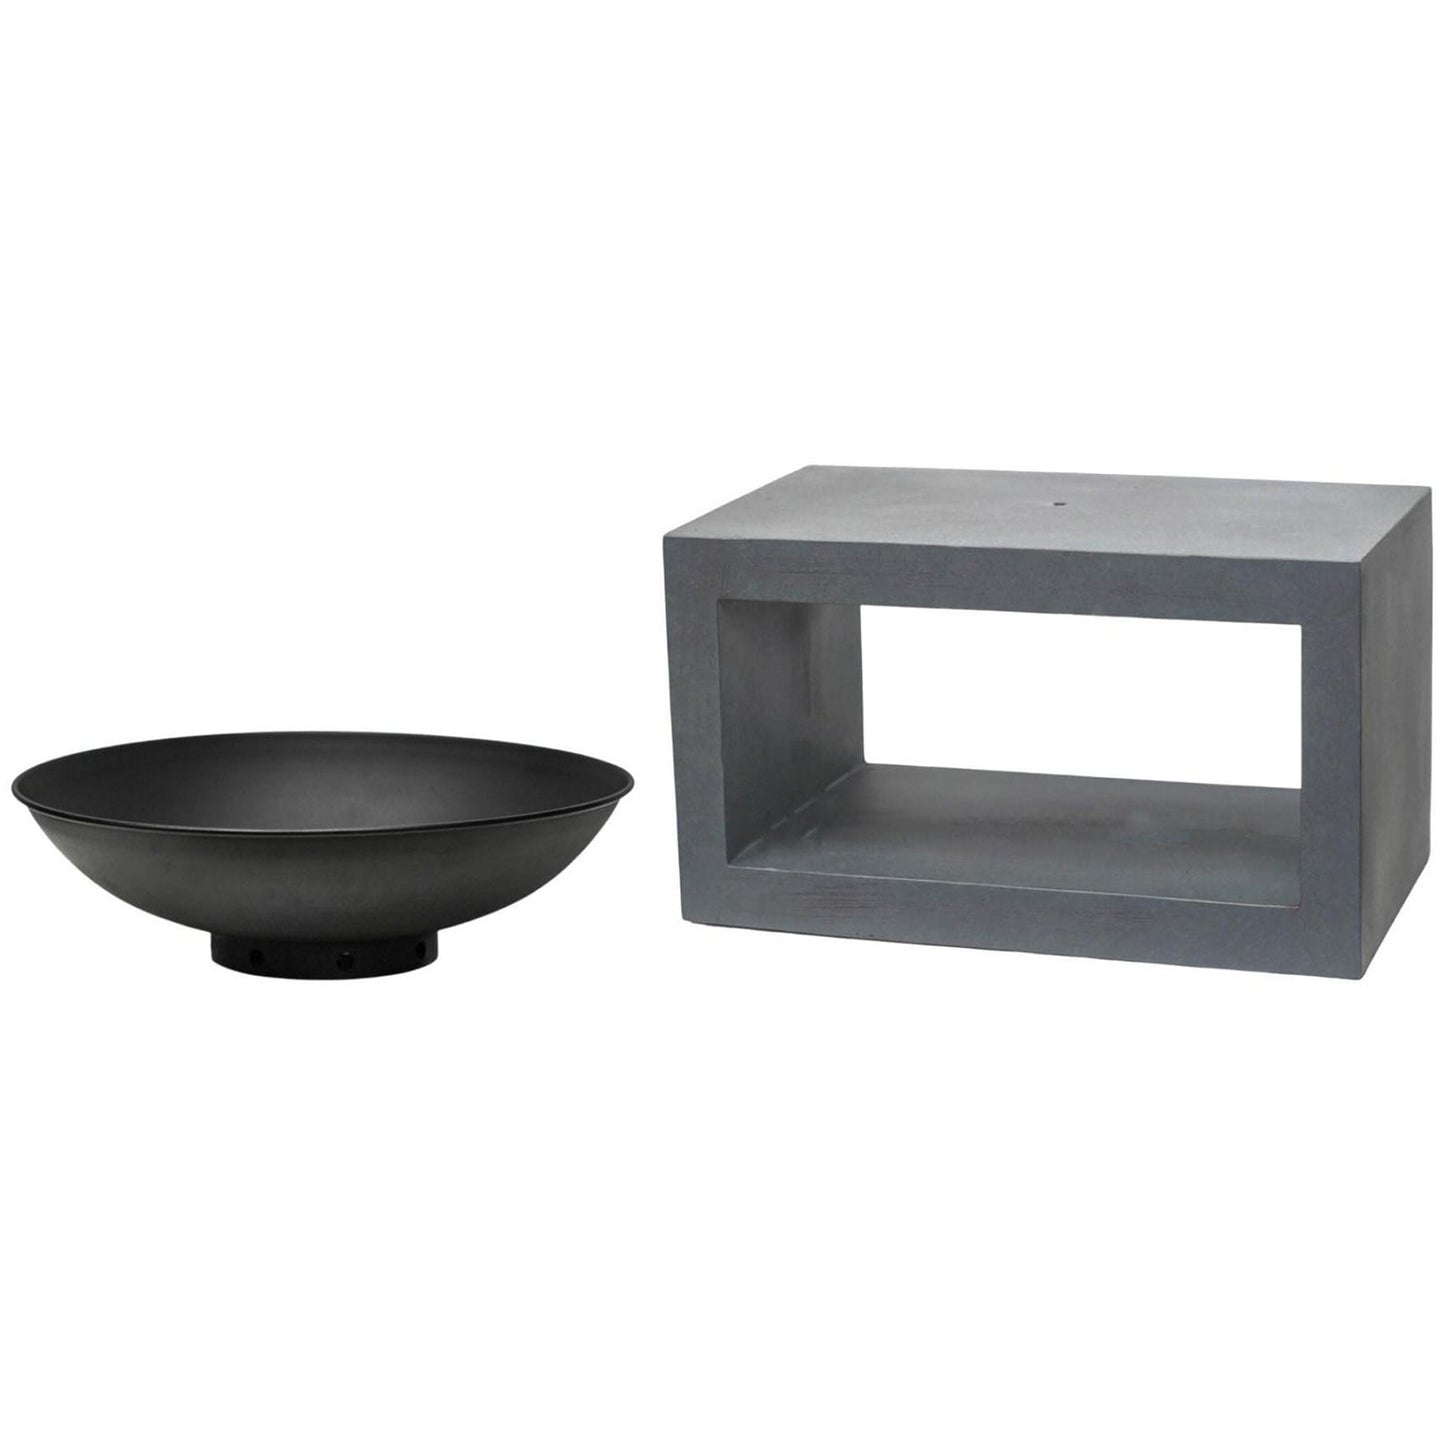 Granite Firebowl & Rectangle Console by Ivyline